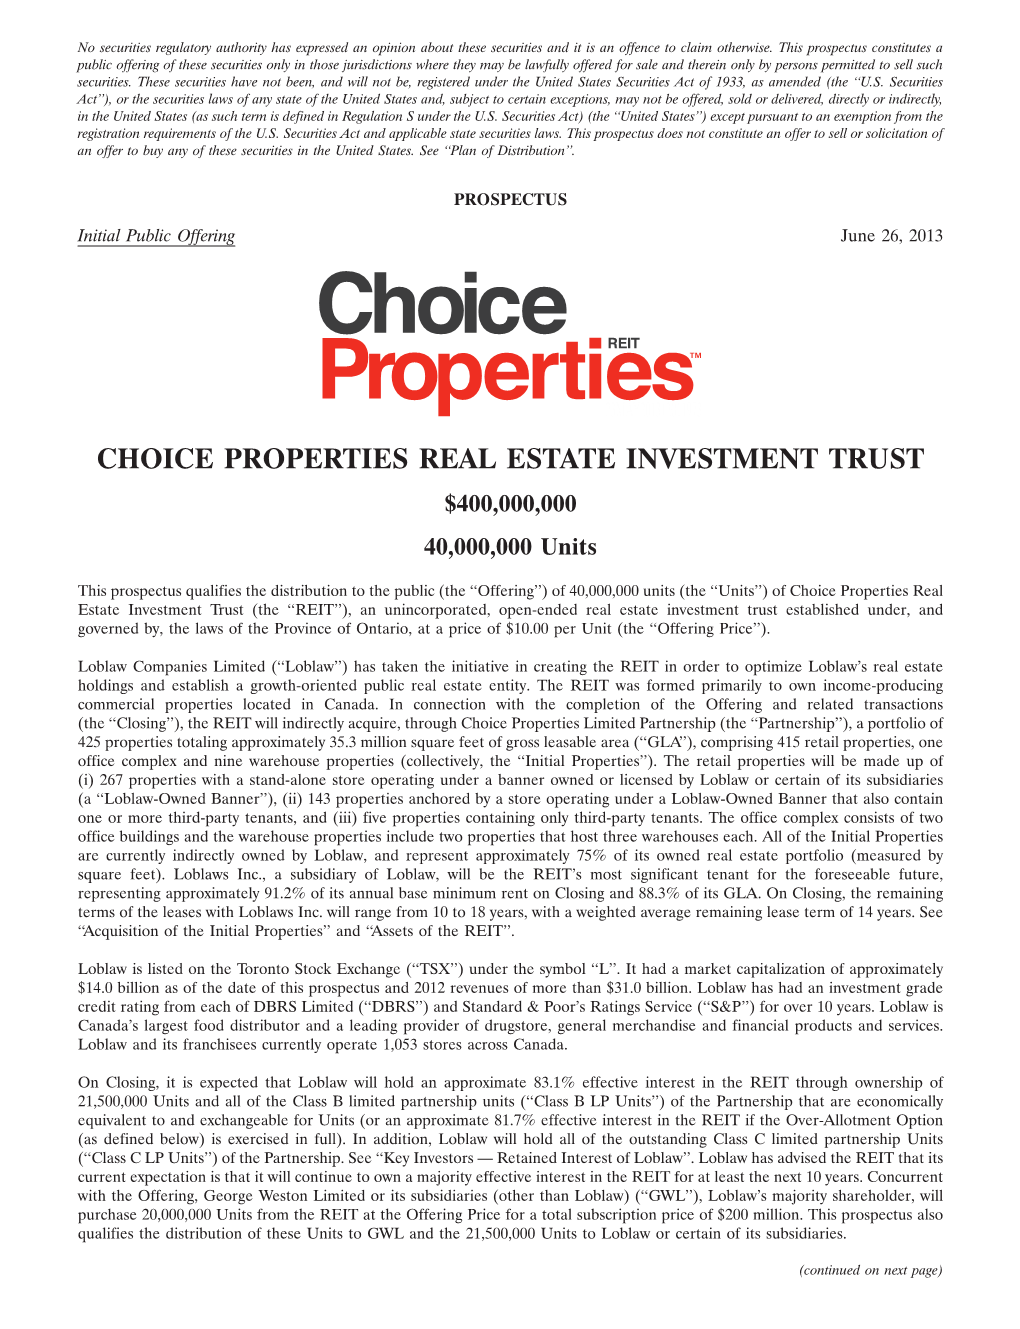 CHOICE PROPERTIES REAL ESTATE INVESTMENT TRUST $400,000,000 40,000,000 Units